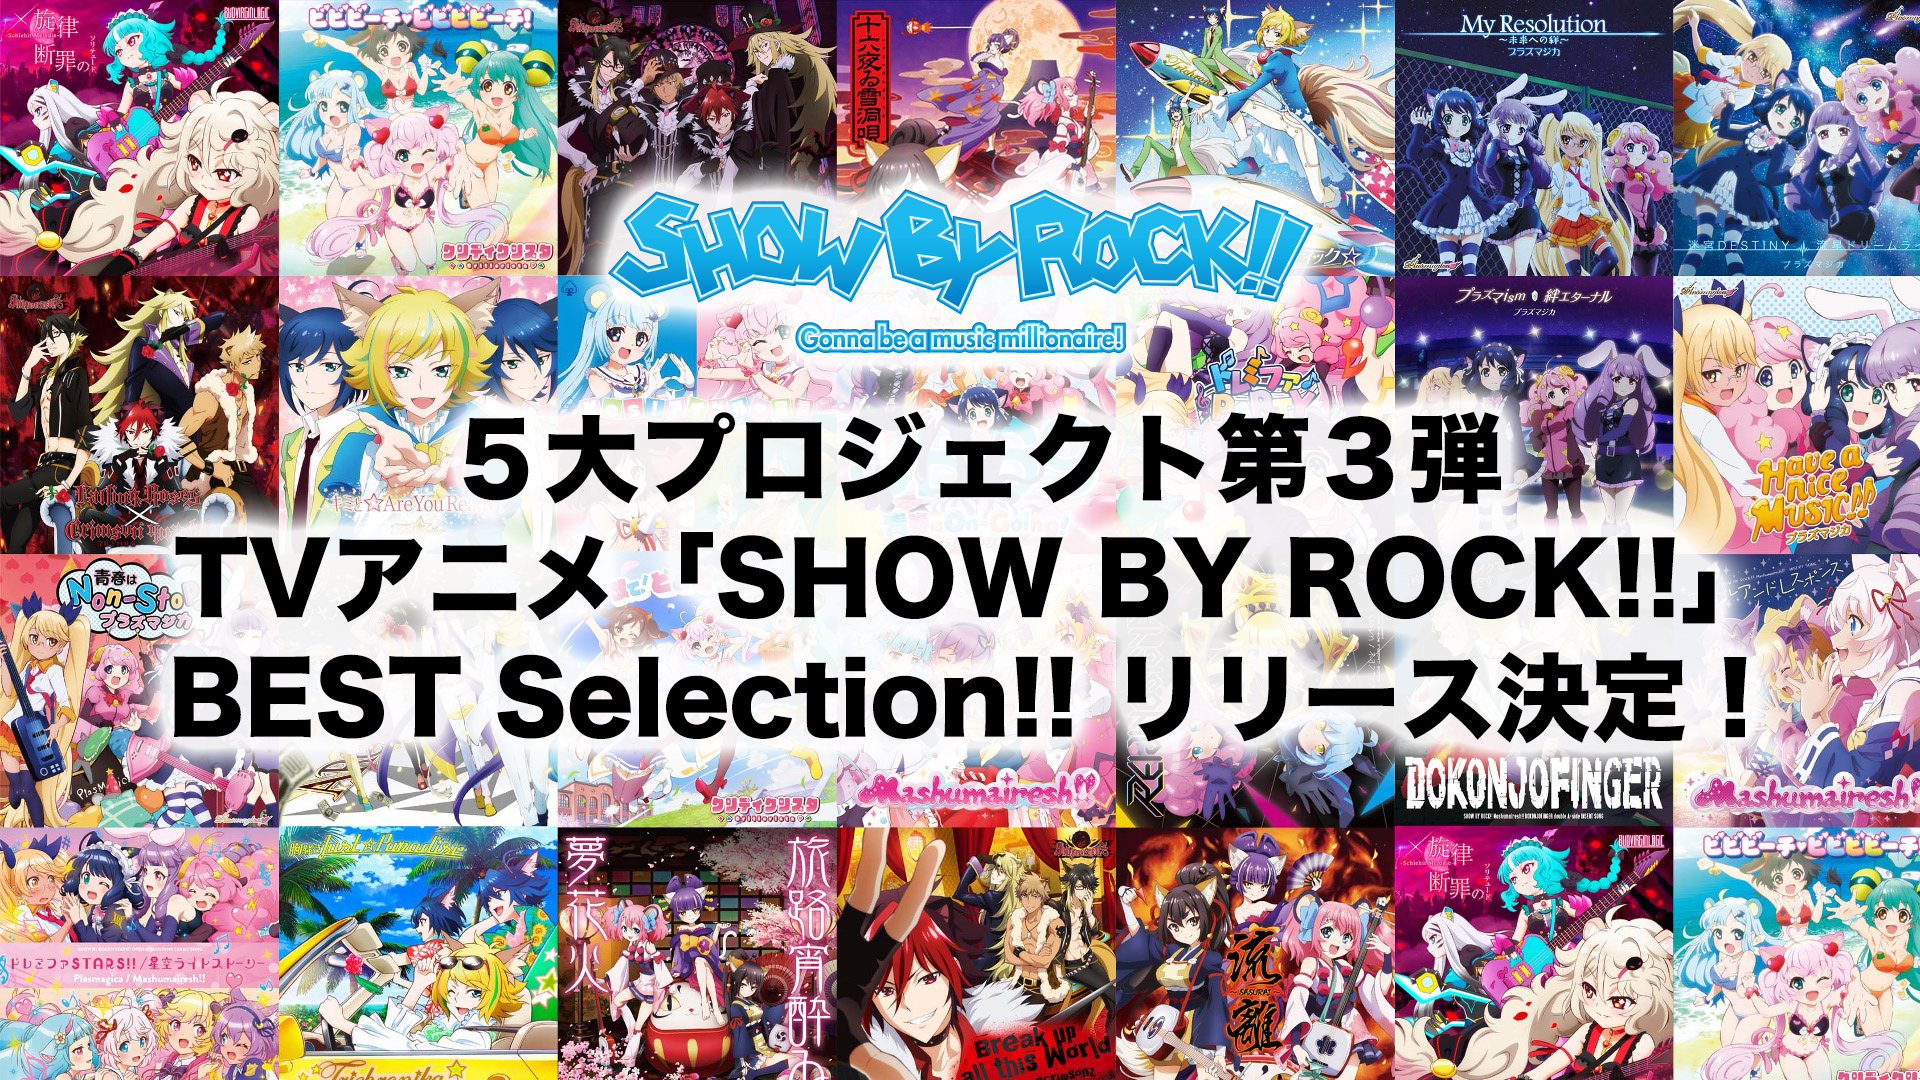 Category: Show By Rock!! Mashumairesh!!